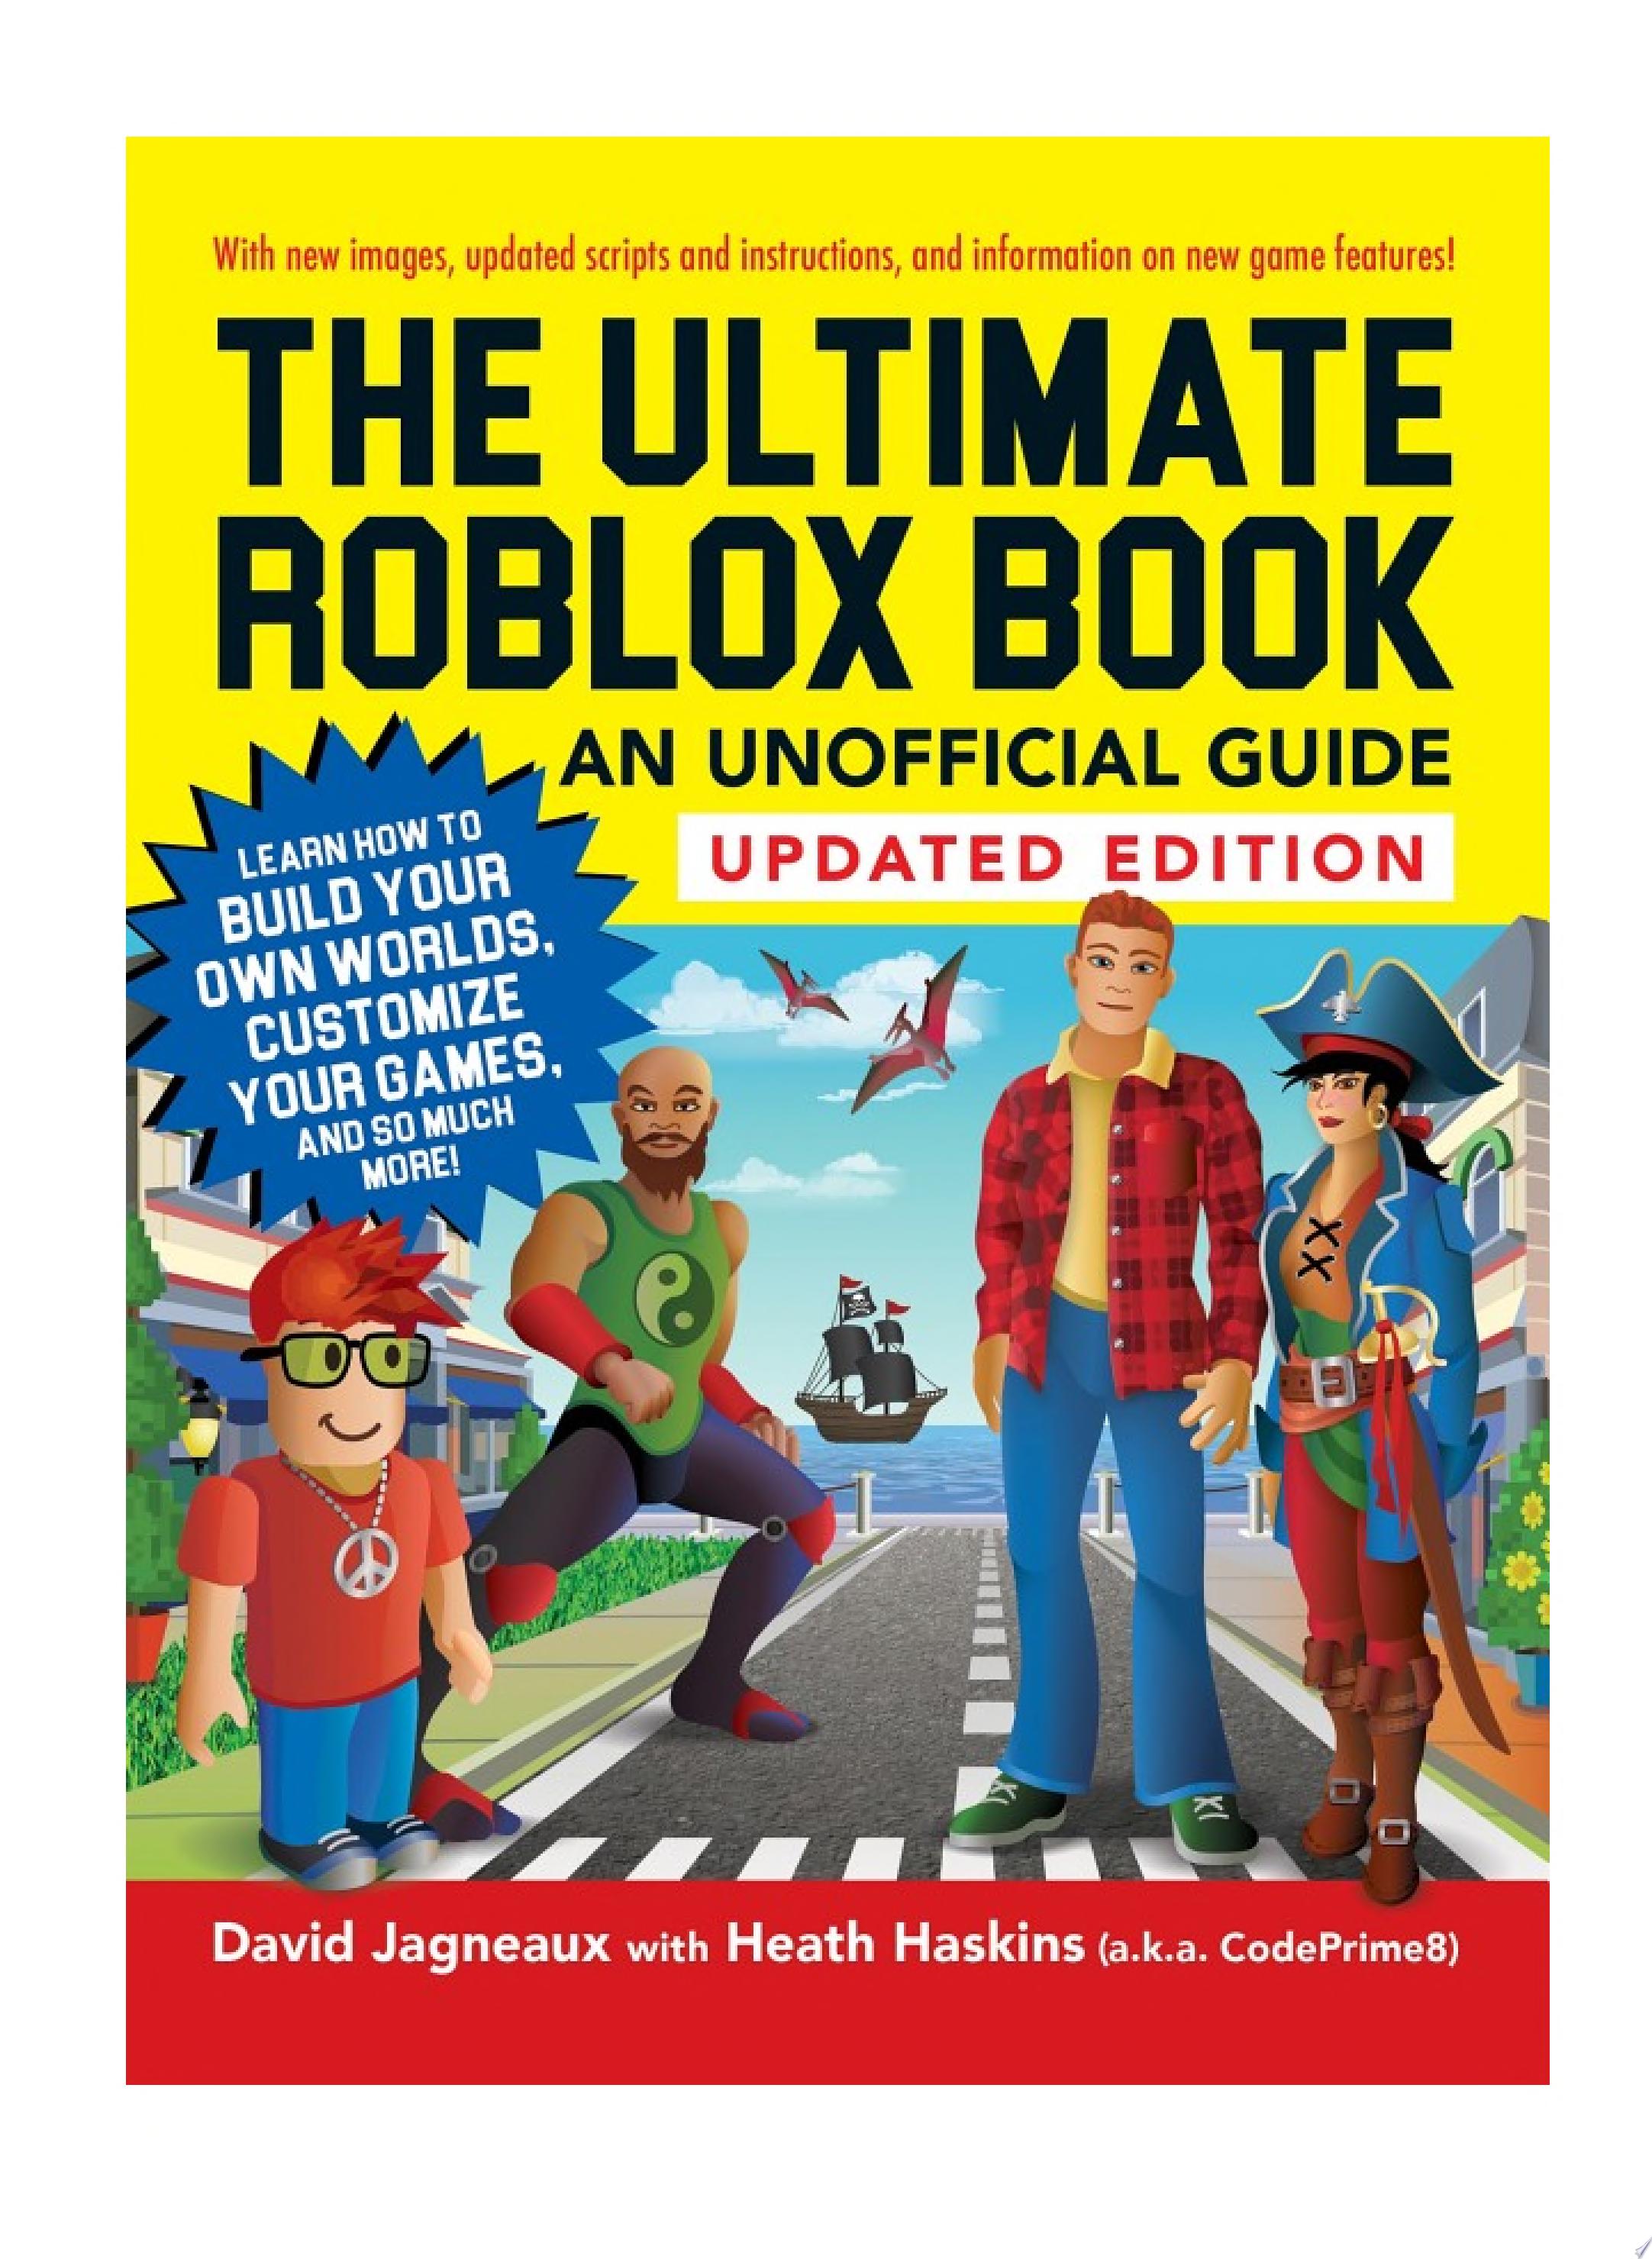 Image for "The Ultimate Roblox Book: An Unofficial Guide, Updated Edition"